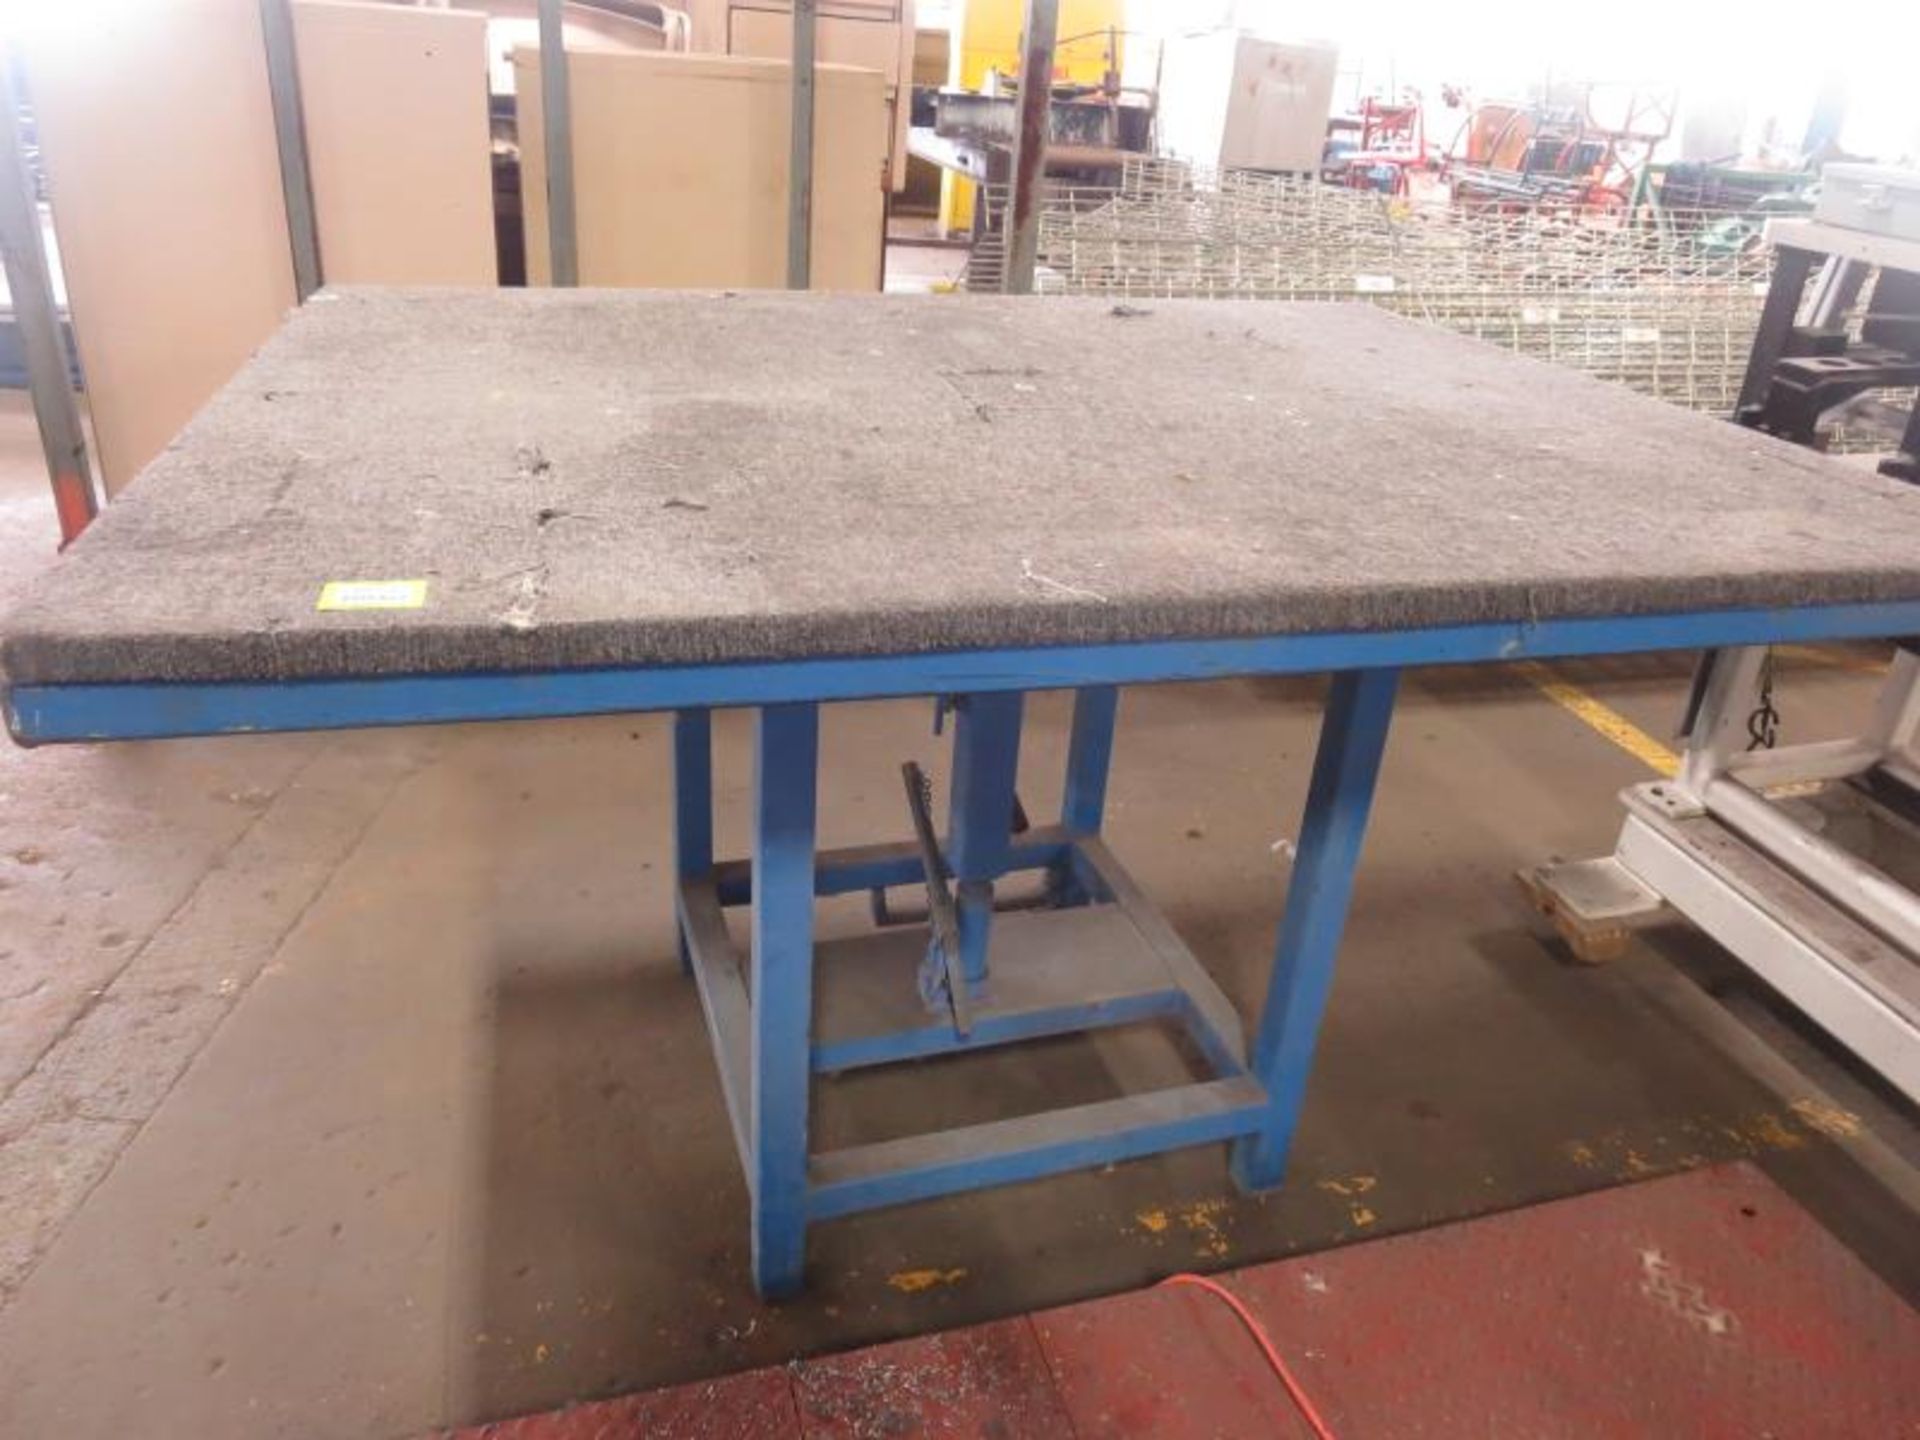 Rotating Work Table, 48" x 60" x 37"h with hydraulic lift. Hit # 2185765. M8-M9. Asset Located at